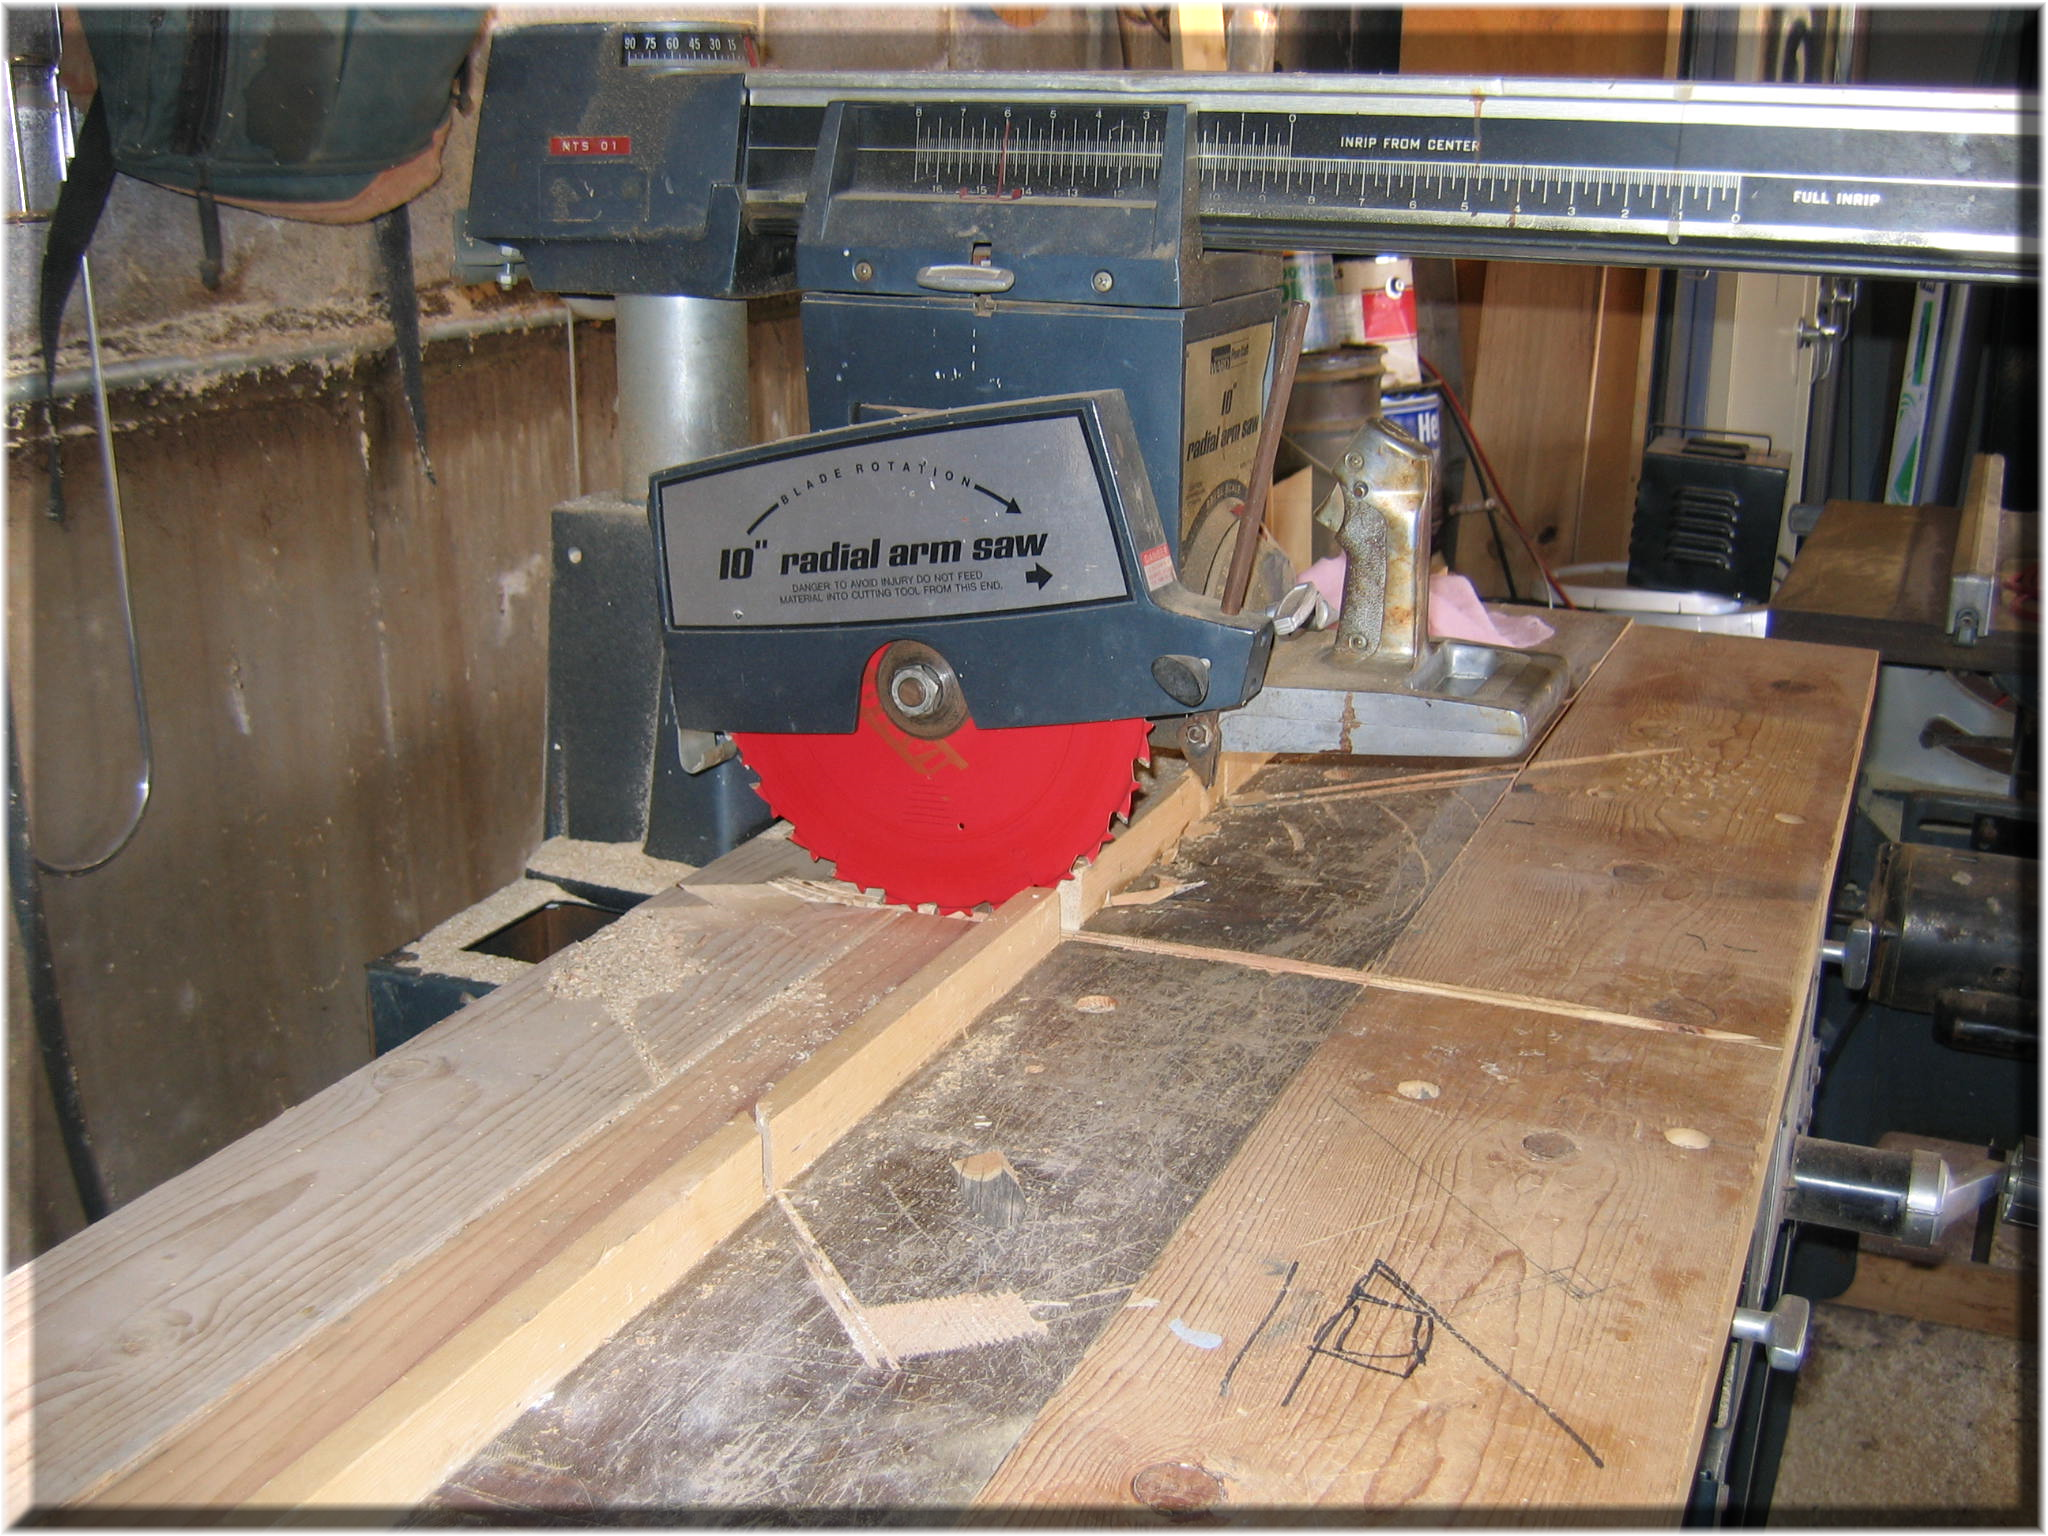 This radial arm saw is missing its bottom guard severe struck by hazard